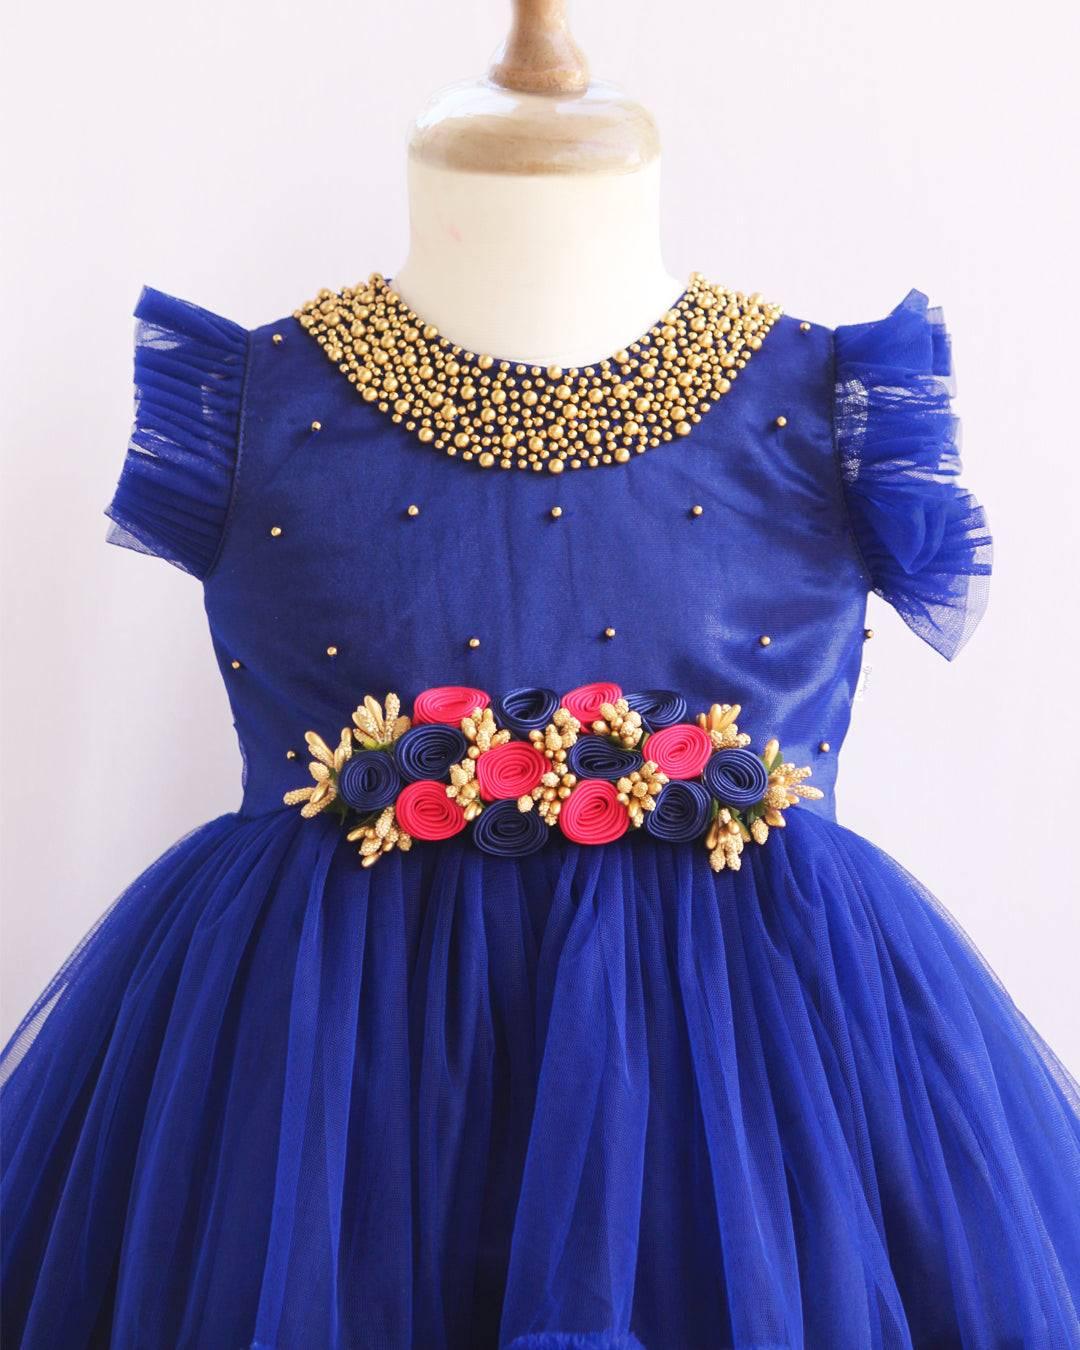 Navyblue Shade Handwork Flower Frock
Material:  Navy blue shade mono nylon net fabric with premium glossy satin as lining. Inner portion is covered with premium ultra satin and white cotton lining. Cen